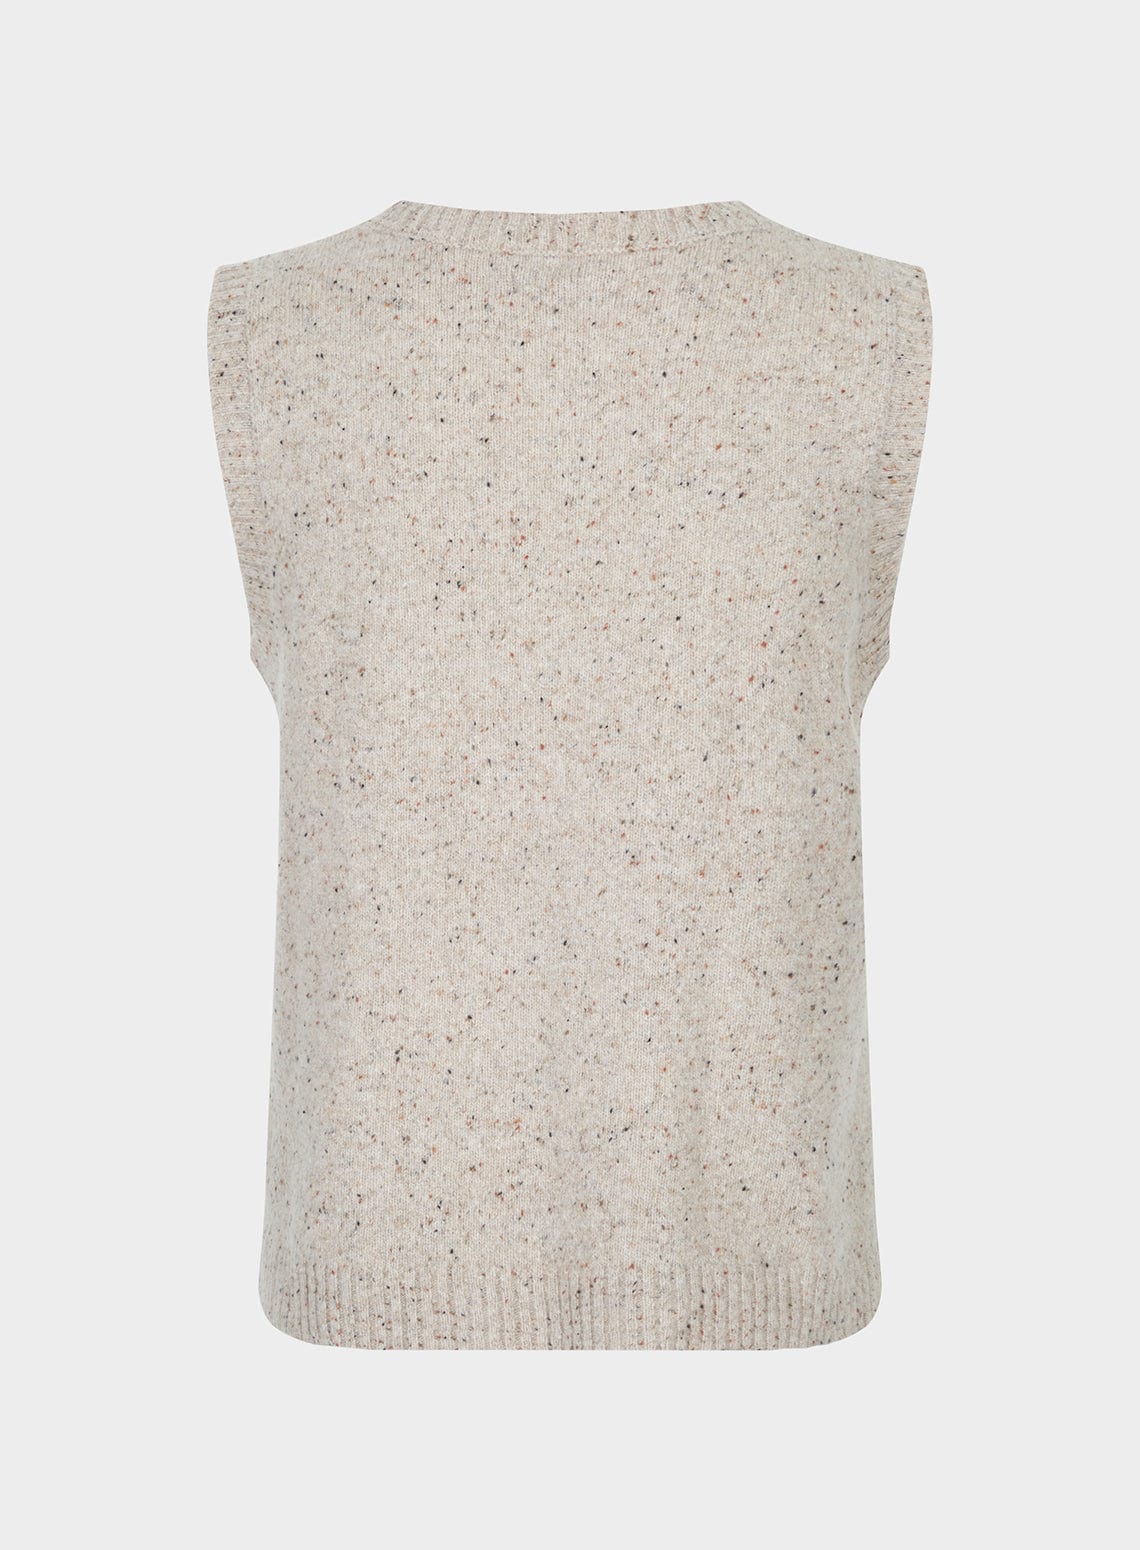 Knitted Neppy Vest in Natural